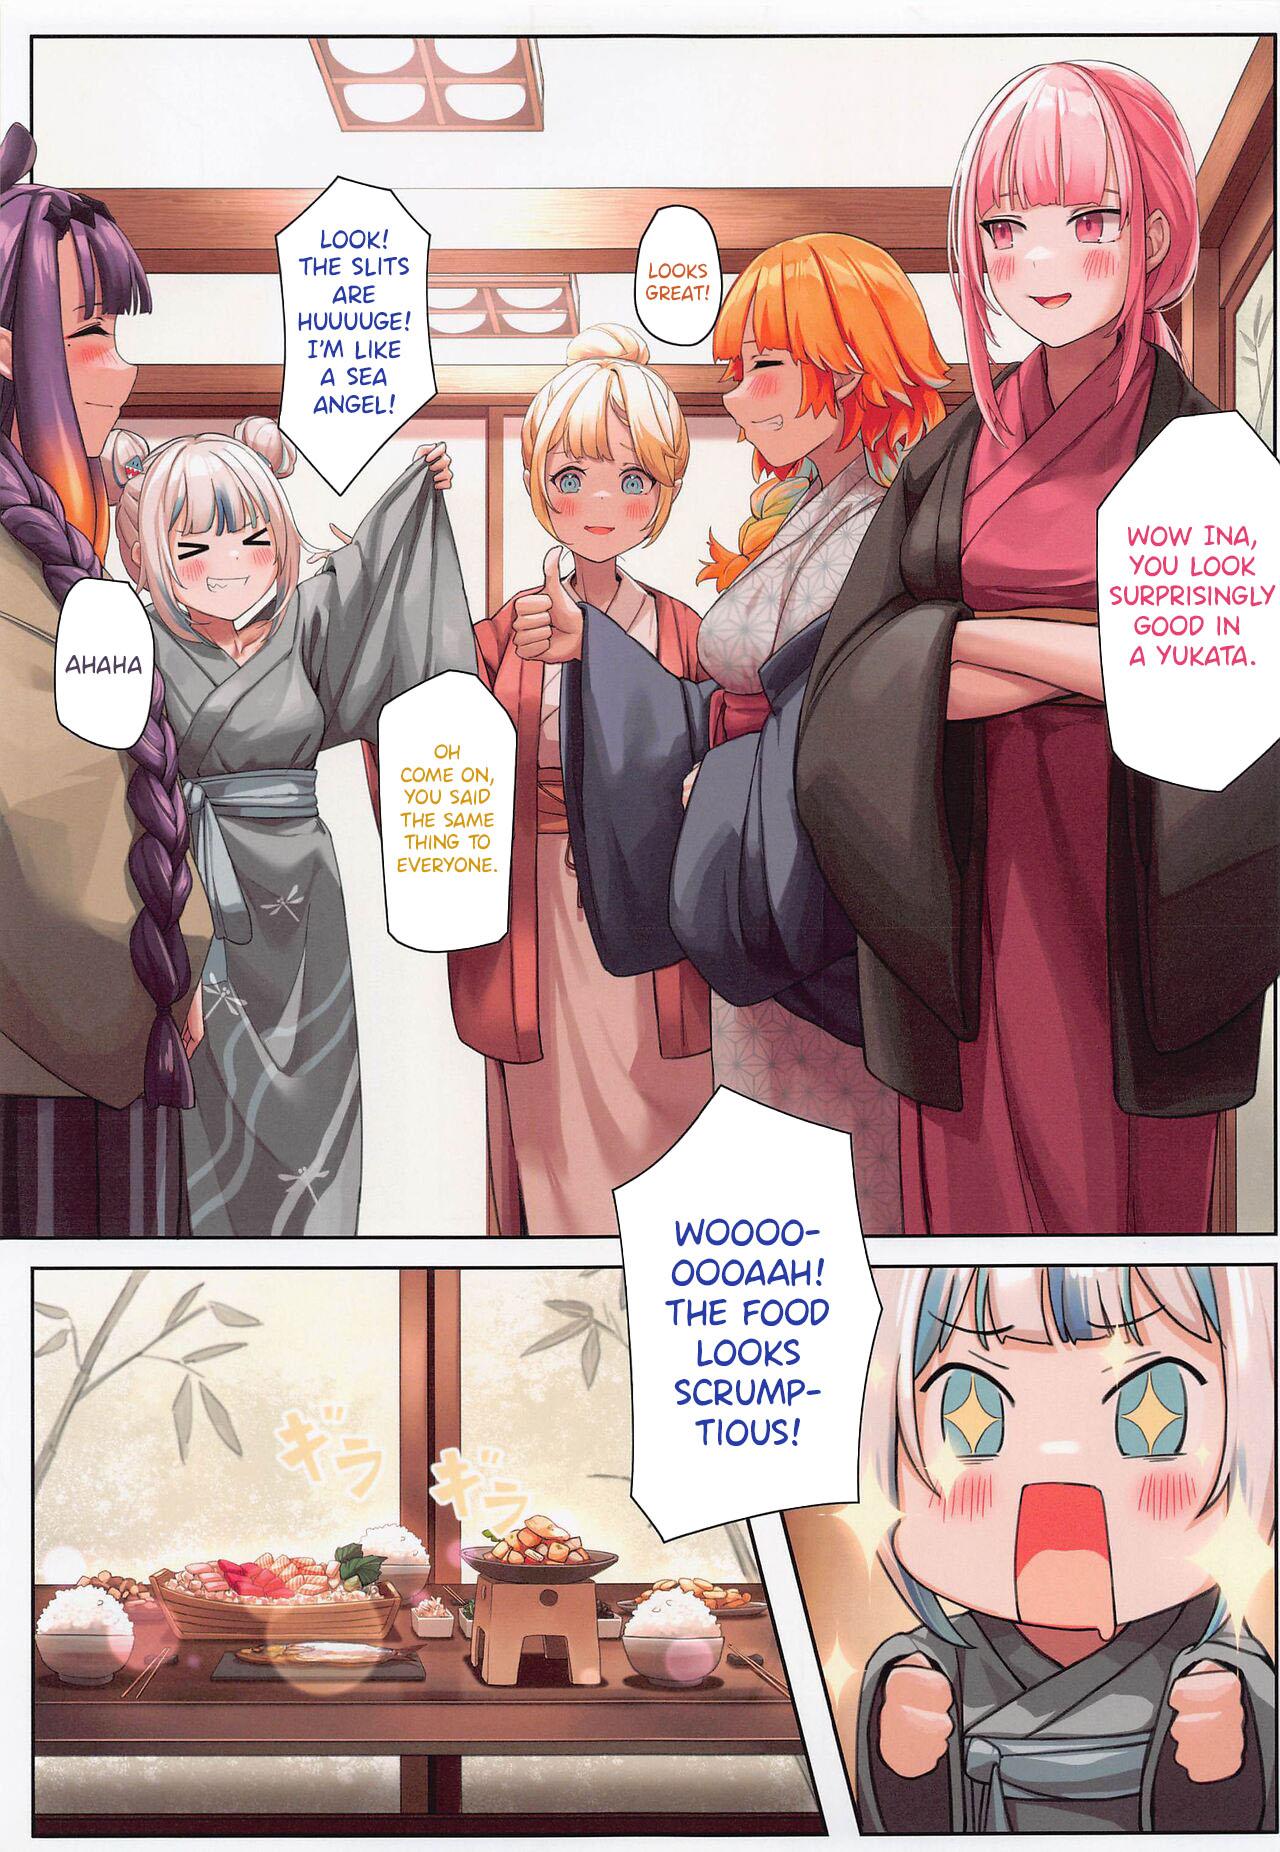 Interracial Hardcore AmeSame Onsen Ryokou no Iroiro | The Many Happenings of AmeSame's Hot Spring Trip - Hololive Fucking Sex - Page 6